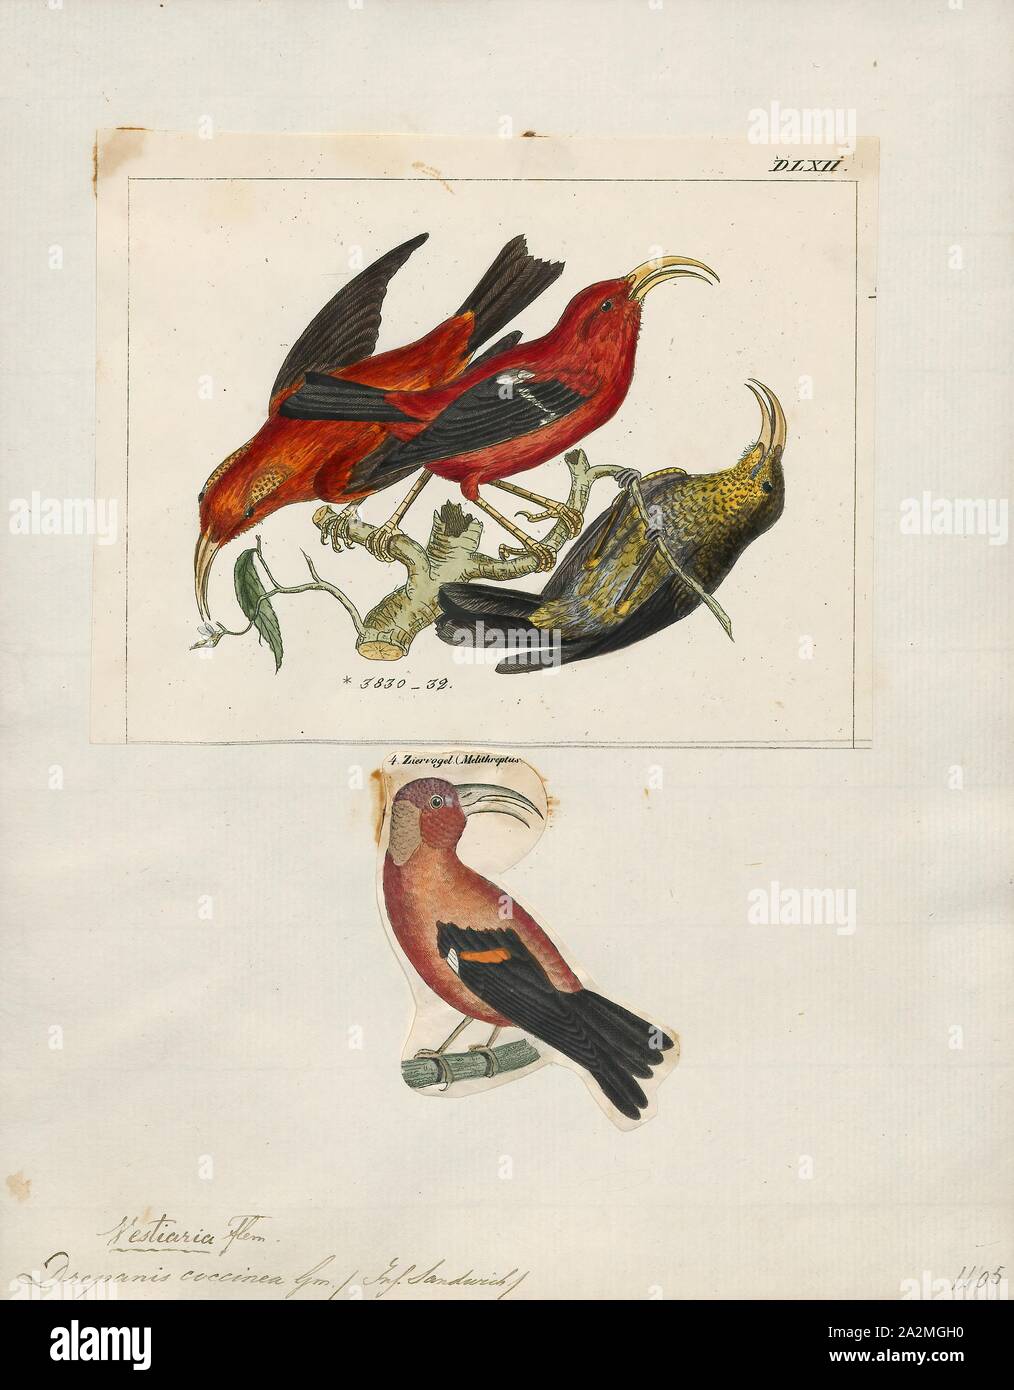 Drepanis coccinea, Print, The 'I'iwi, or scarlet honeycreeper is a species of Hawaiian honeycreeper. The 'I'iwi is a highly recognizable symbol of Hawaii. The 'I'iwi is the third most common native land bird in the Hawaiian Islands. Large colonies of 'I'iwi inhabit the islands of Hawaii, Maui, and Kaua'i, with smaller populations on Moloka'i but are no longer present on Lāna'i and O'ahu. ʻIʻiwi populations on Kauaʻi are decreasing while there are stable populations on Maui and Hawaii., 1700-1880 Stock Photo